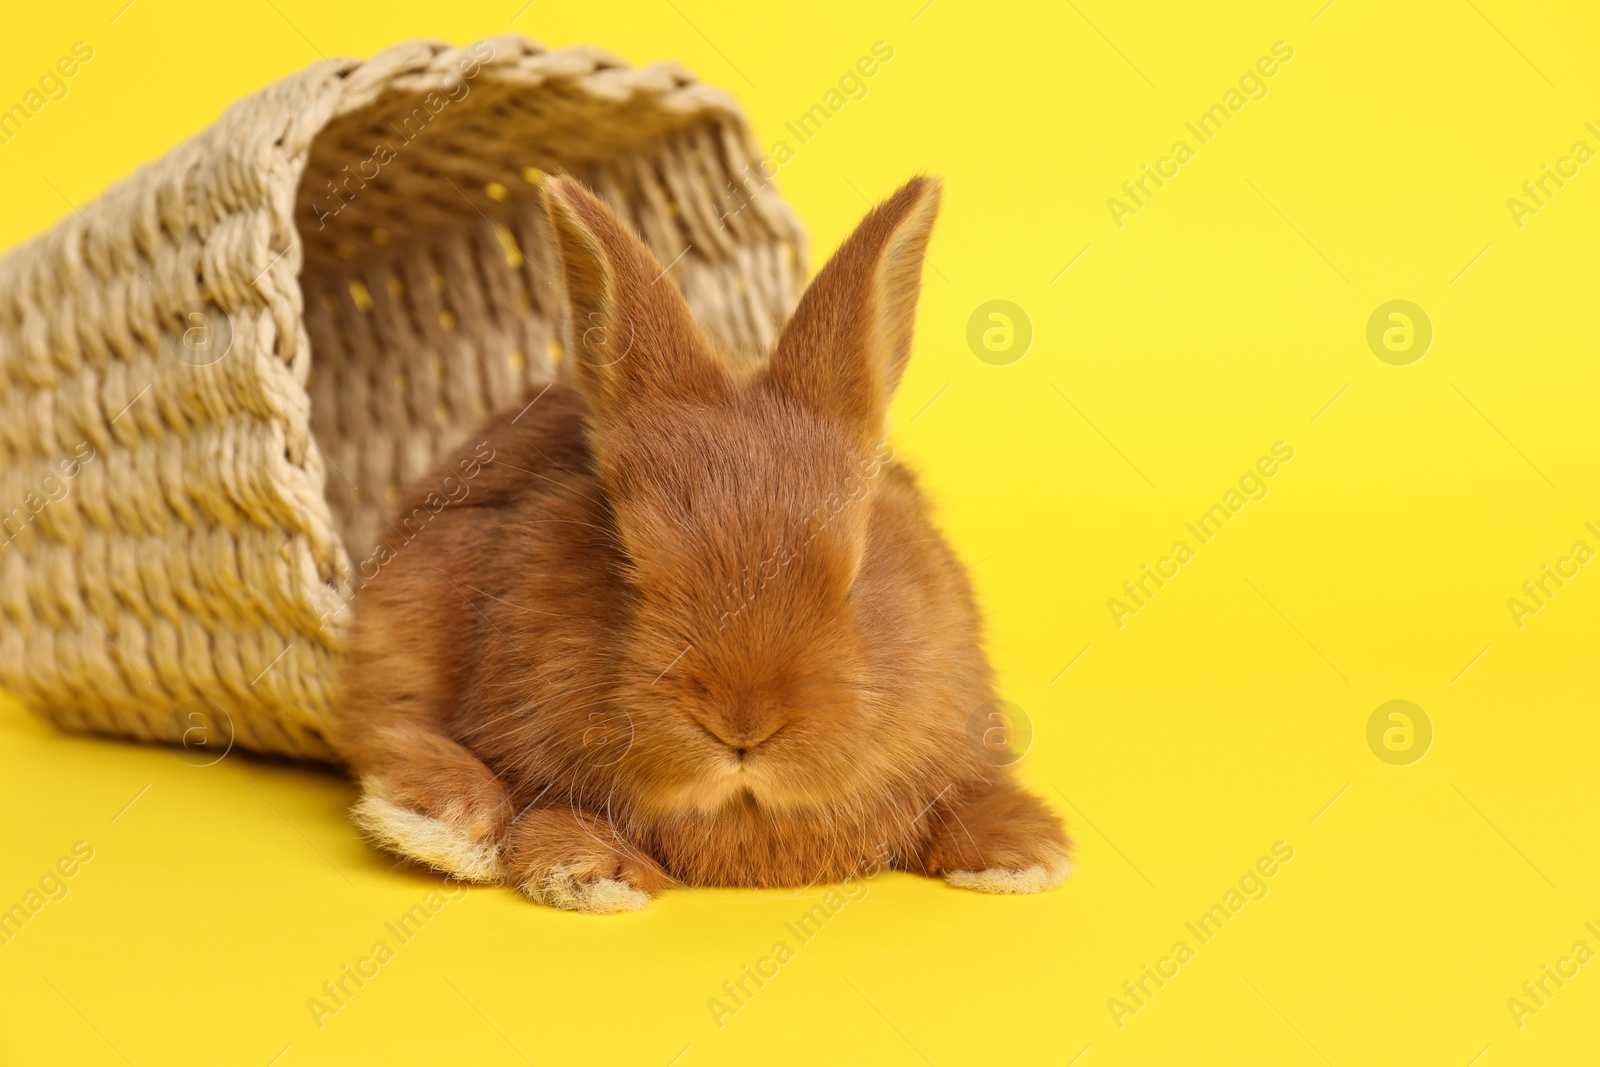 Photo of Adorable fluffy bunny and wicker basket on yellow background. Easter symbol